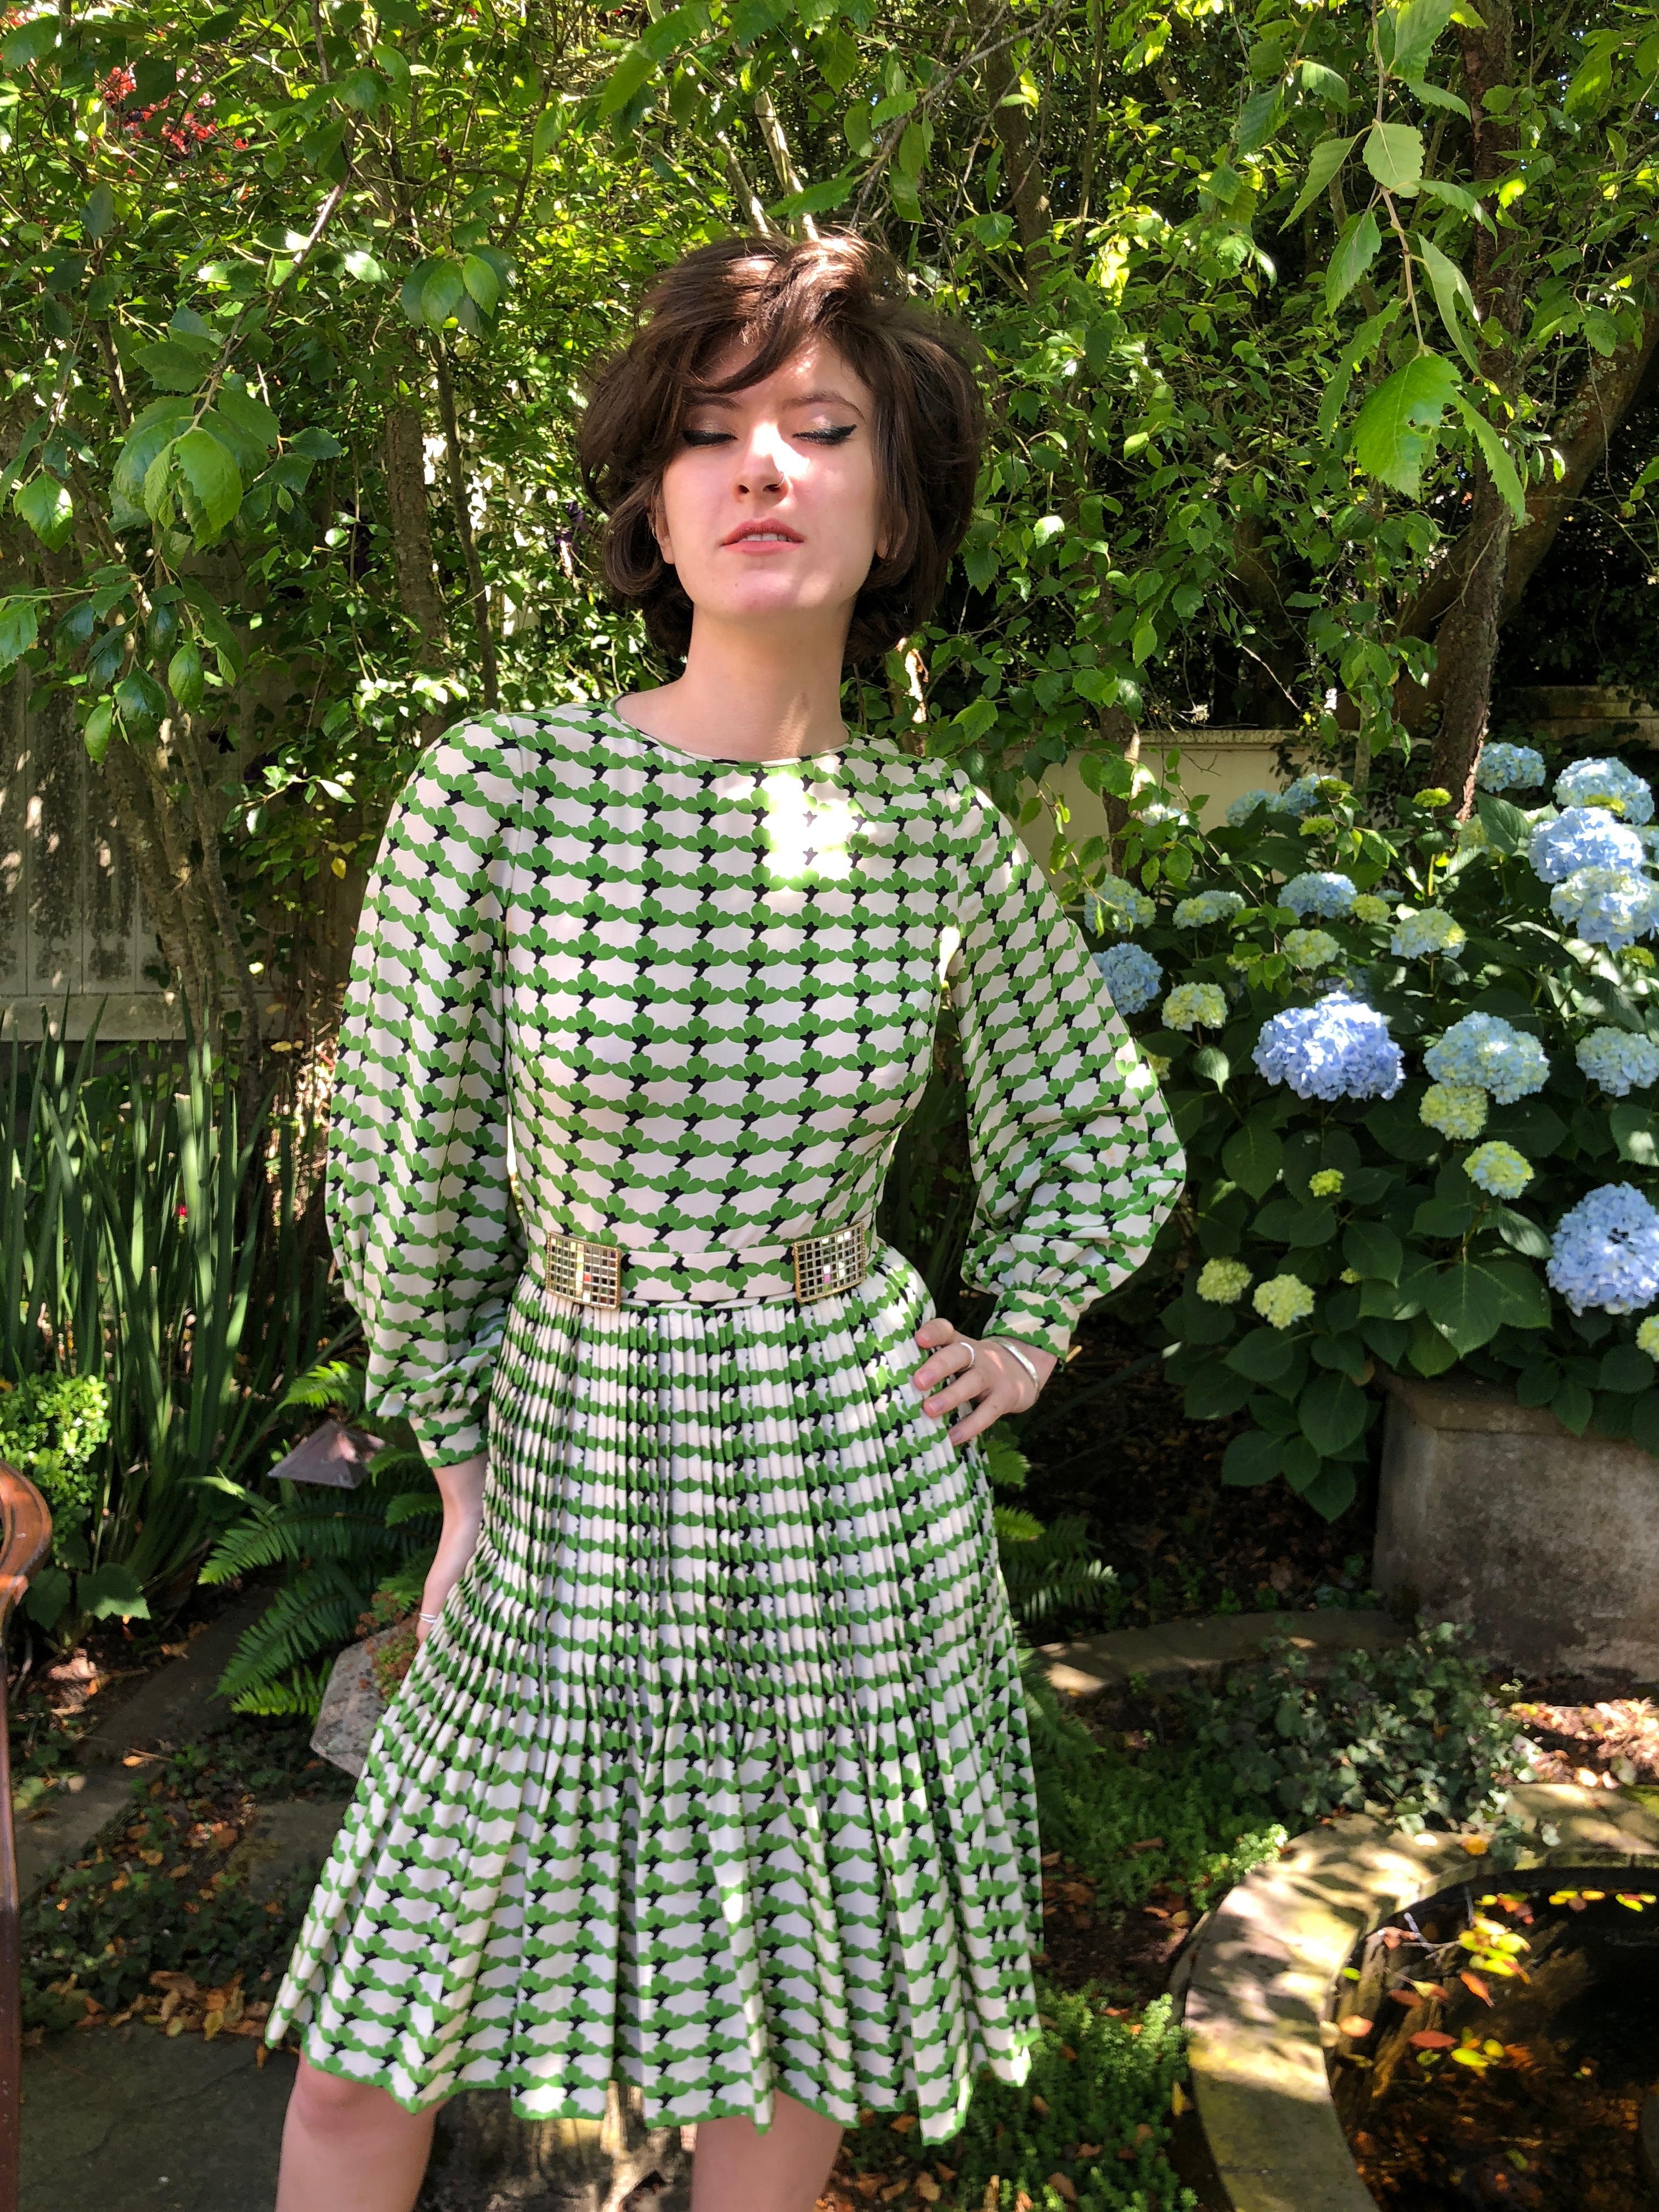 Cardinali Green Poet Sleeve Pleated Kick Skirt Day Dress with Disco Ball Belt
From the Archive of Marilyn Lewis, the creator of Cardinali
Cardinali was founded in Los Angeles in 1970, by Marilyn Lewis, who had already found success as the founder